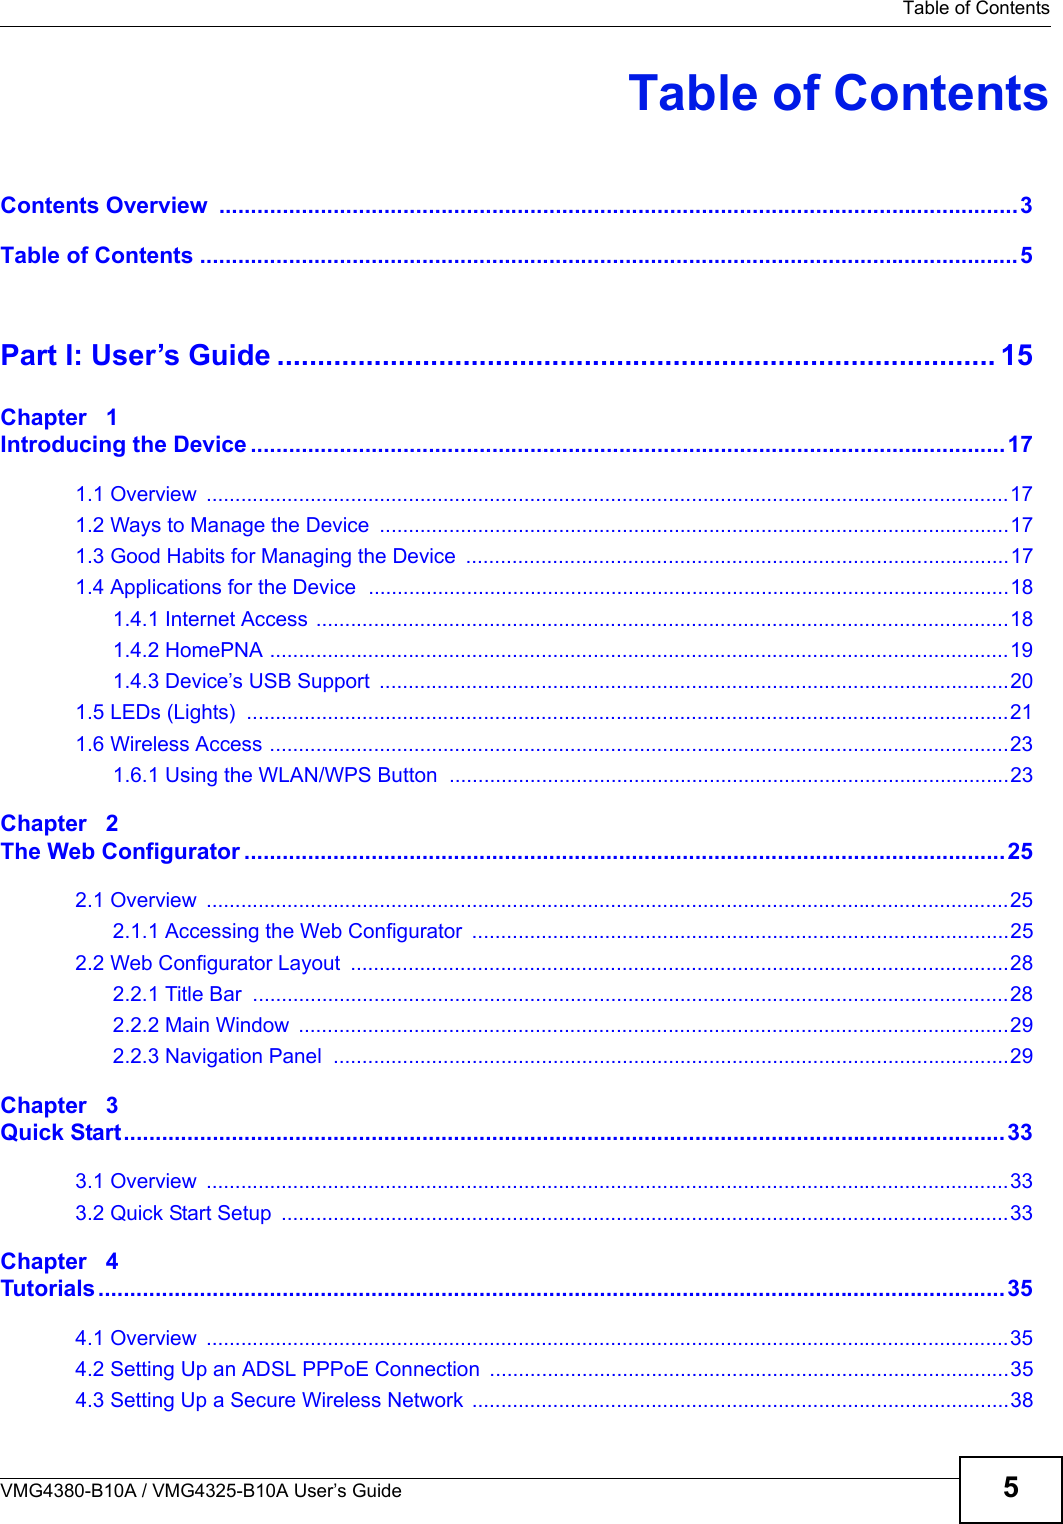 Table of ContentsVMG4380-B10A / VMG4325-B10A User’s Guide 5Table of ContentsContents Overview  ..............................................................................................................................3Table of Contents .................................................................................................................................5Part I: User’s Guide ......................................................................................... 15Chapter   1Introducing the Device .......................................................................................................................171.1 Overview  ...........................................................................................................................................171.2 Ways to Manage the Device  .............................................................................................................171.3 Good Habits for Managing the Device  ..............................................................................................171.4 Applications for the Device  ...............................................................................................................181.4.1 Internet Access ........................................................................................................................181.4.2 HomePNA ................................................................................................................................191.4.3 Device’s USB Support  .............................................................................................................201.5 LEDs (Lights)  ....................................................................................................................................211.6 Wireless Access ................................................................................................................................231.6.1 Using the WLAN/WPS Button  .................................................................................................23Chapter   2The Web Configurator ........................................................................................................................252.1 Overview  ...........................................................................................................................................252.1.1 Accessing the Web Configurator  .............................................................................................252.2 Web Configurator Layout  ..................................................................................................................282.2.1 Title Bar  ...................................................................................................................................282.2.2 Main Window  ...........................................................................................................................292.2.3 Navigation Panel  .....................................................................................................................29Chapter   3Quick Start...........................................................................................................................................333.1 Overview  ...........................................................................................................................................333.2 Quick Start Setup  ..............................................................................................................................33Chapter   4Tutorials...............................................................................................................................................354.1 Overview  ...........................................................................................................................................354.2 Setting Up an ADSL PPPoE Connection  ..........................................................................................354.3 Setting Up a Secure Wireless Network  .............................................................................................38